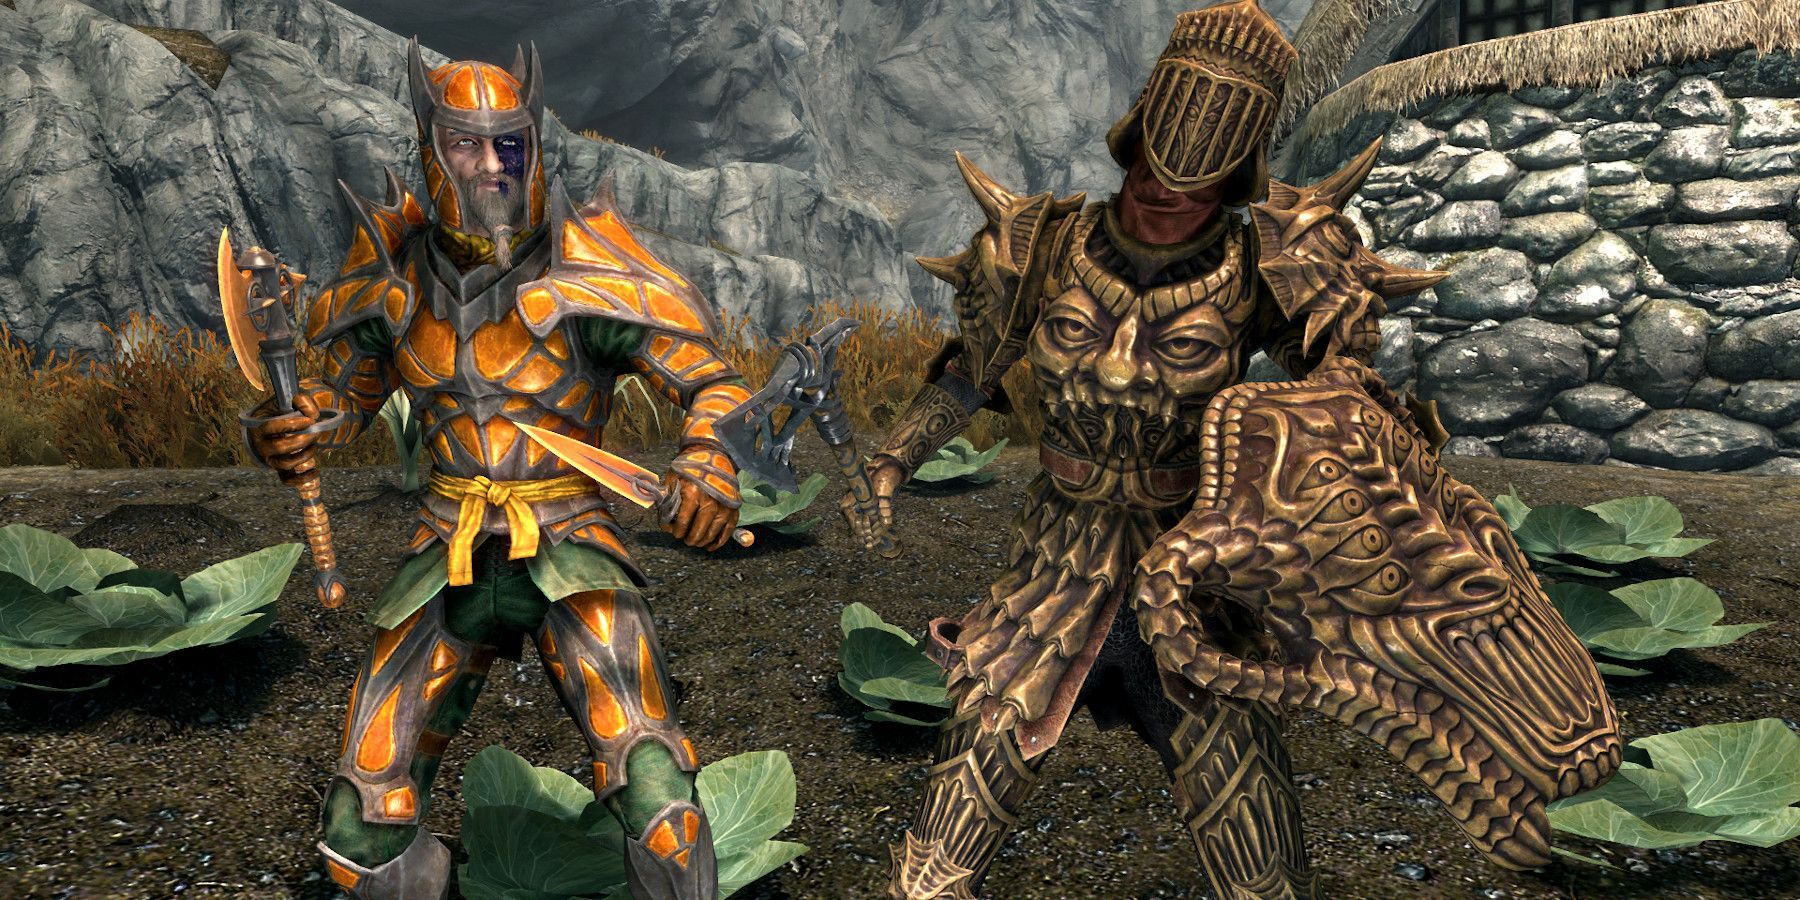 Skyrim Saints and Seducers armored foes in a lettuce field